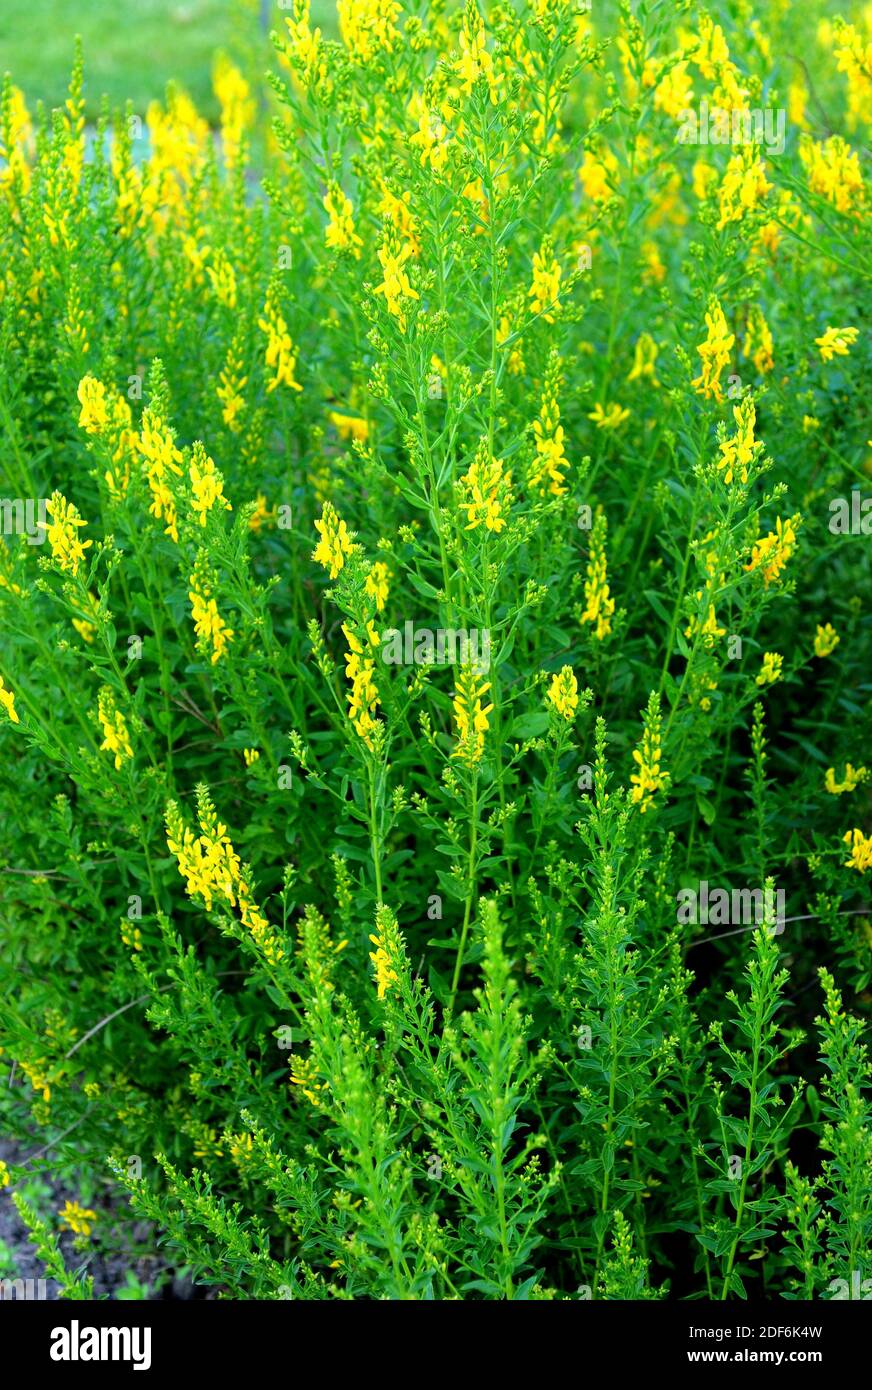 Dyer broom (Genista tinctoria) is a dyer and medicinal shrub native to Europe and Turkey. Stock Photo